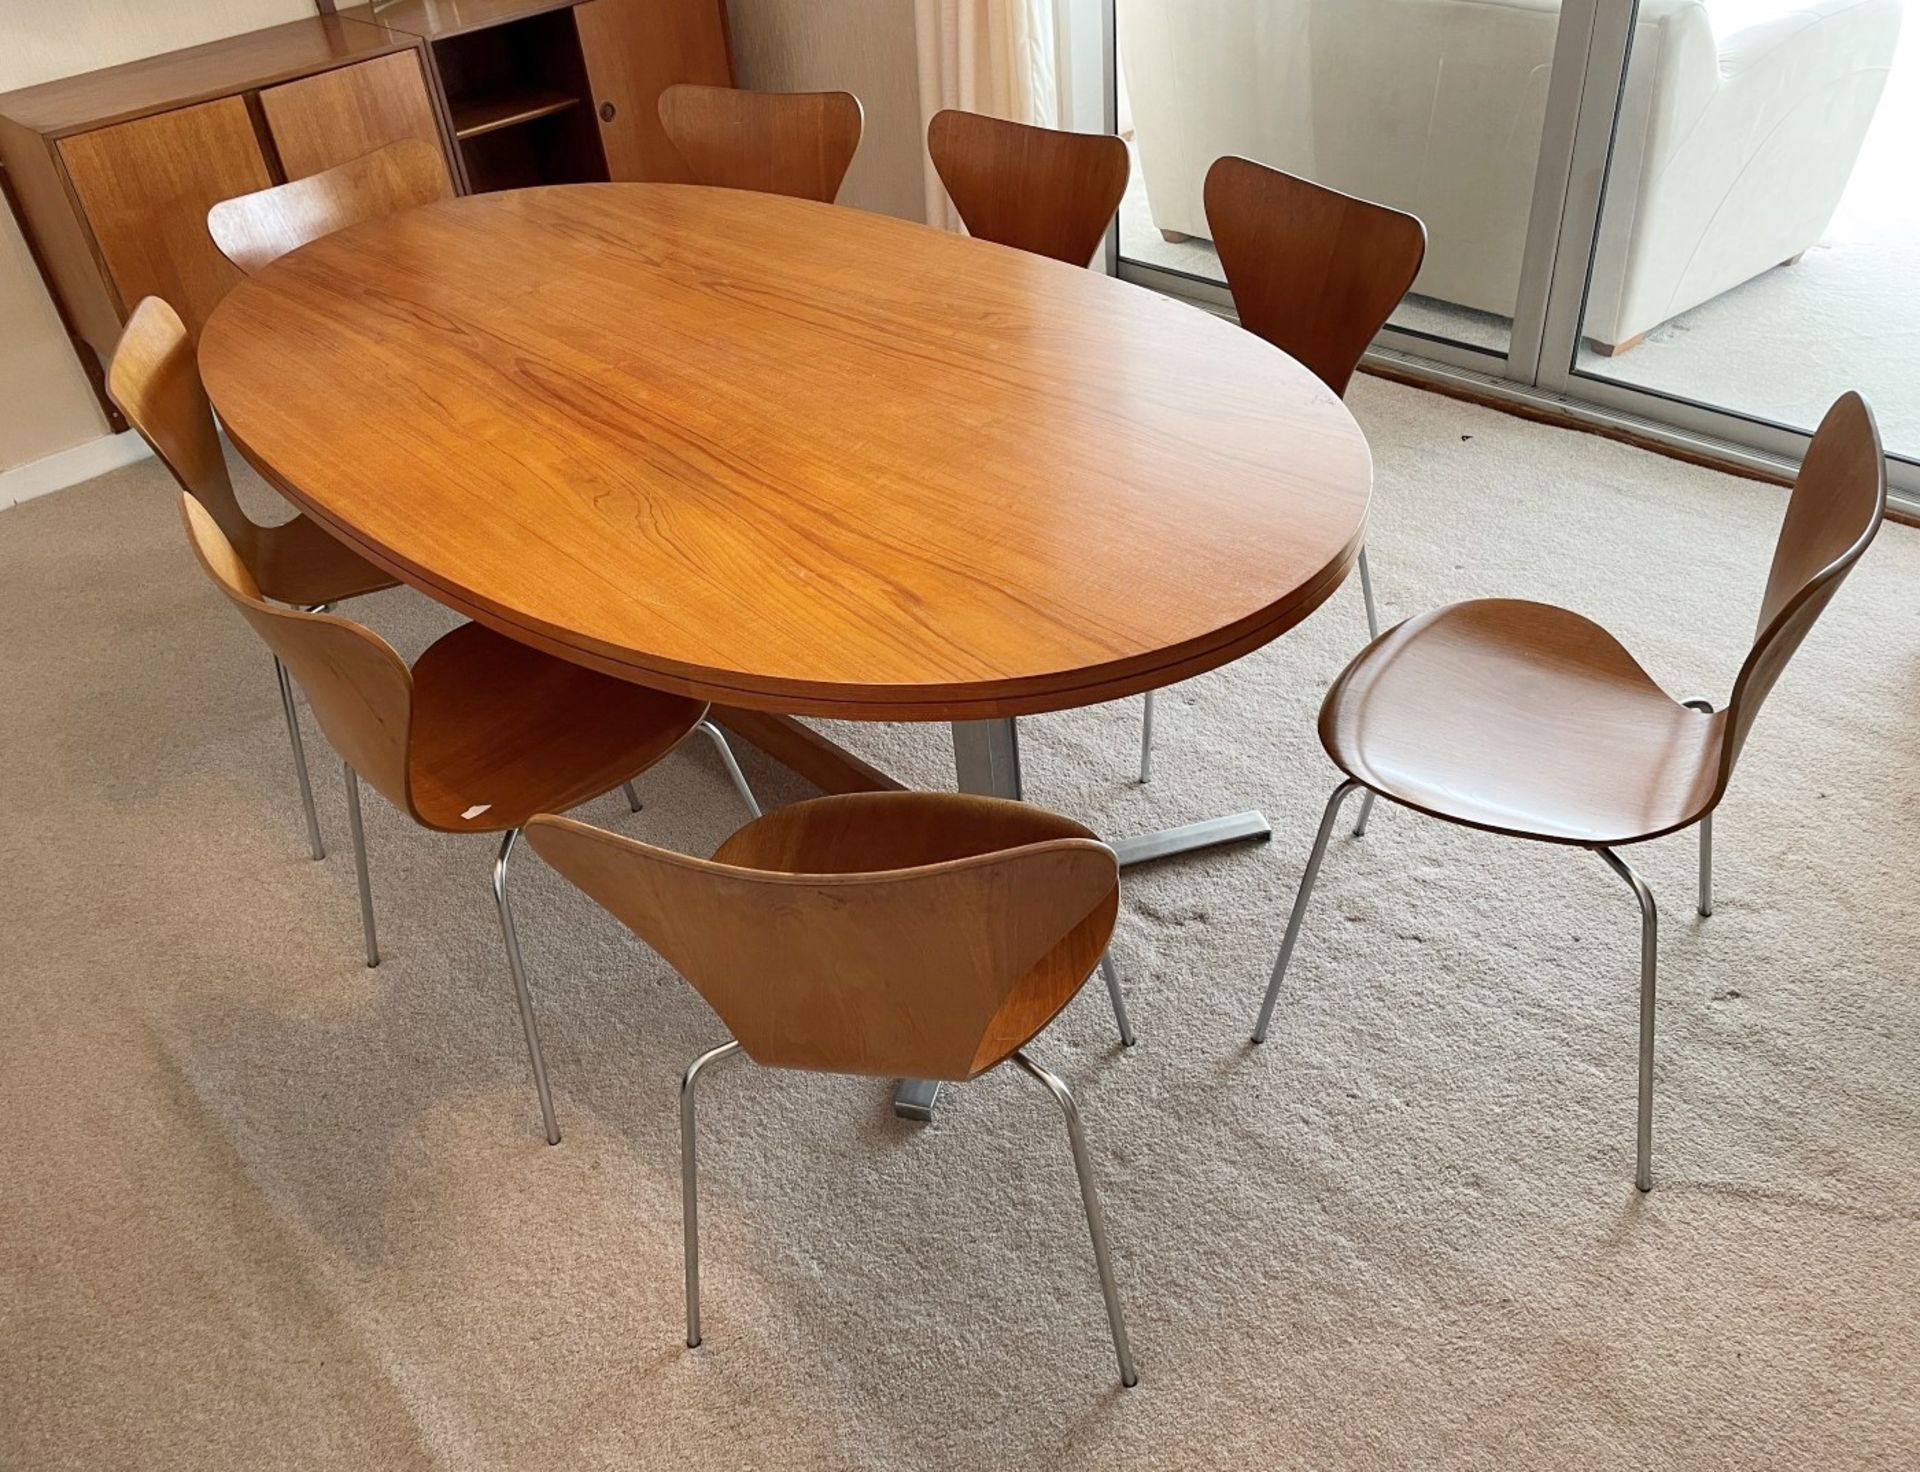 1 x Genuine Vintage FRITZ HANSEN Designer Dining Table With 8 x Chairs - Dated 1970